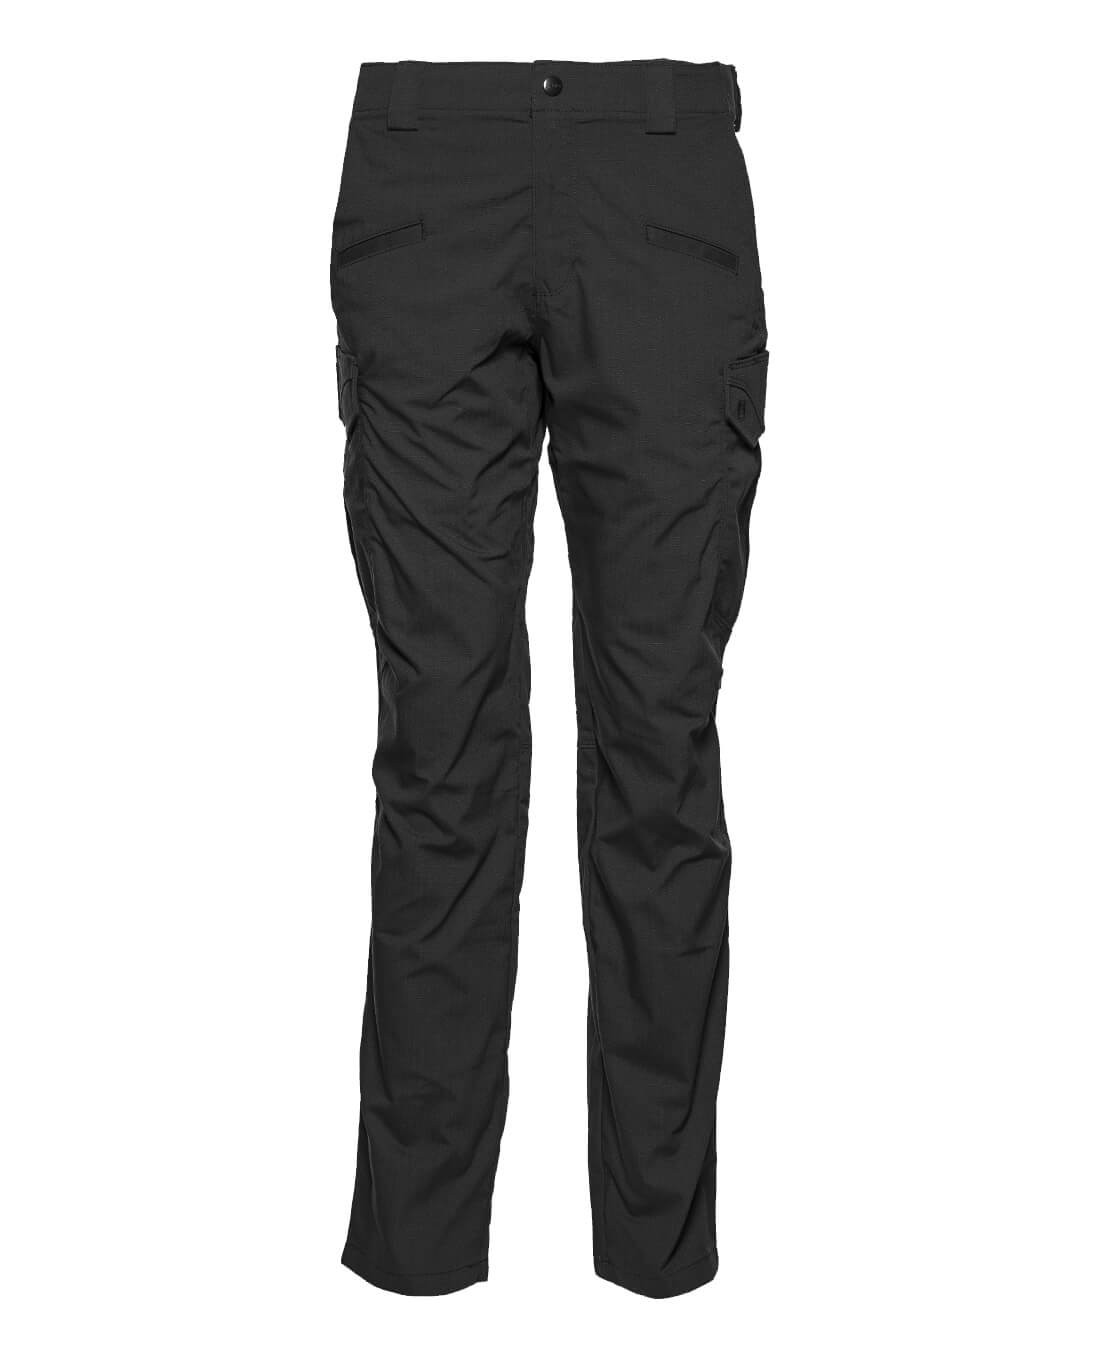 5.11 Tactical Icon Pant Black - 74521.019 - TACWRK